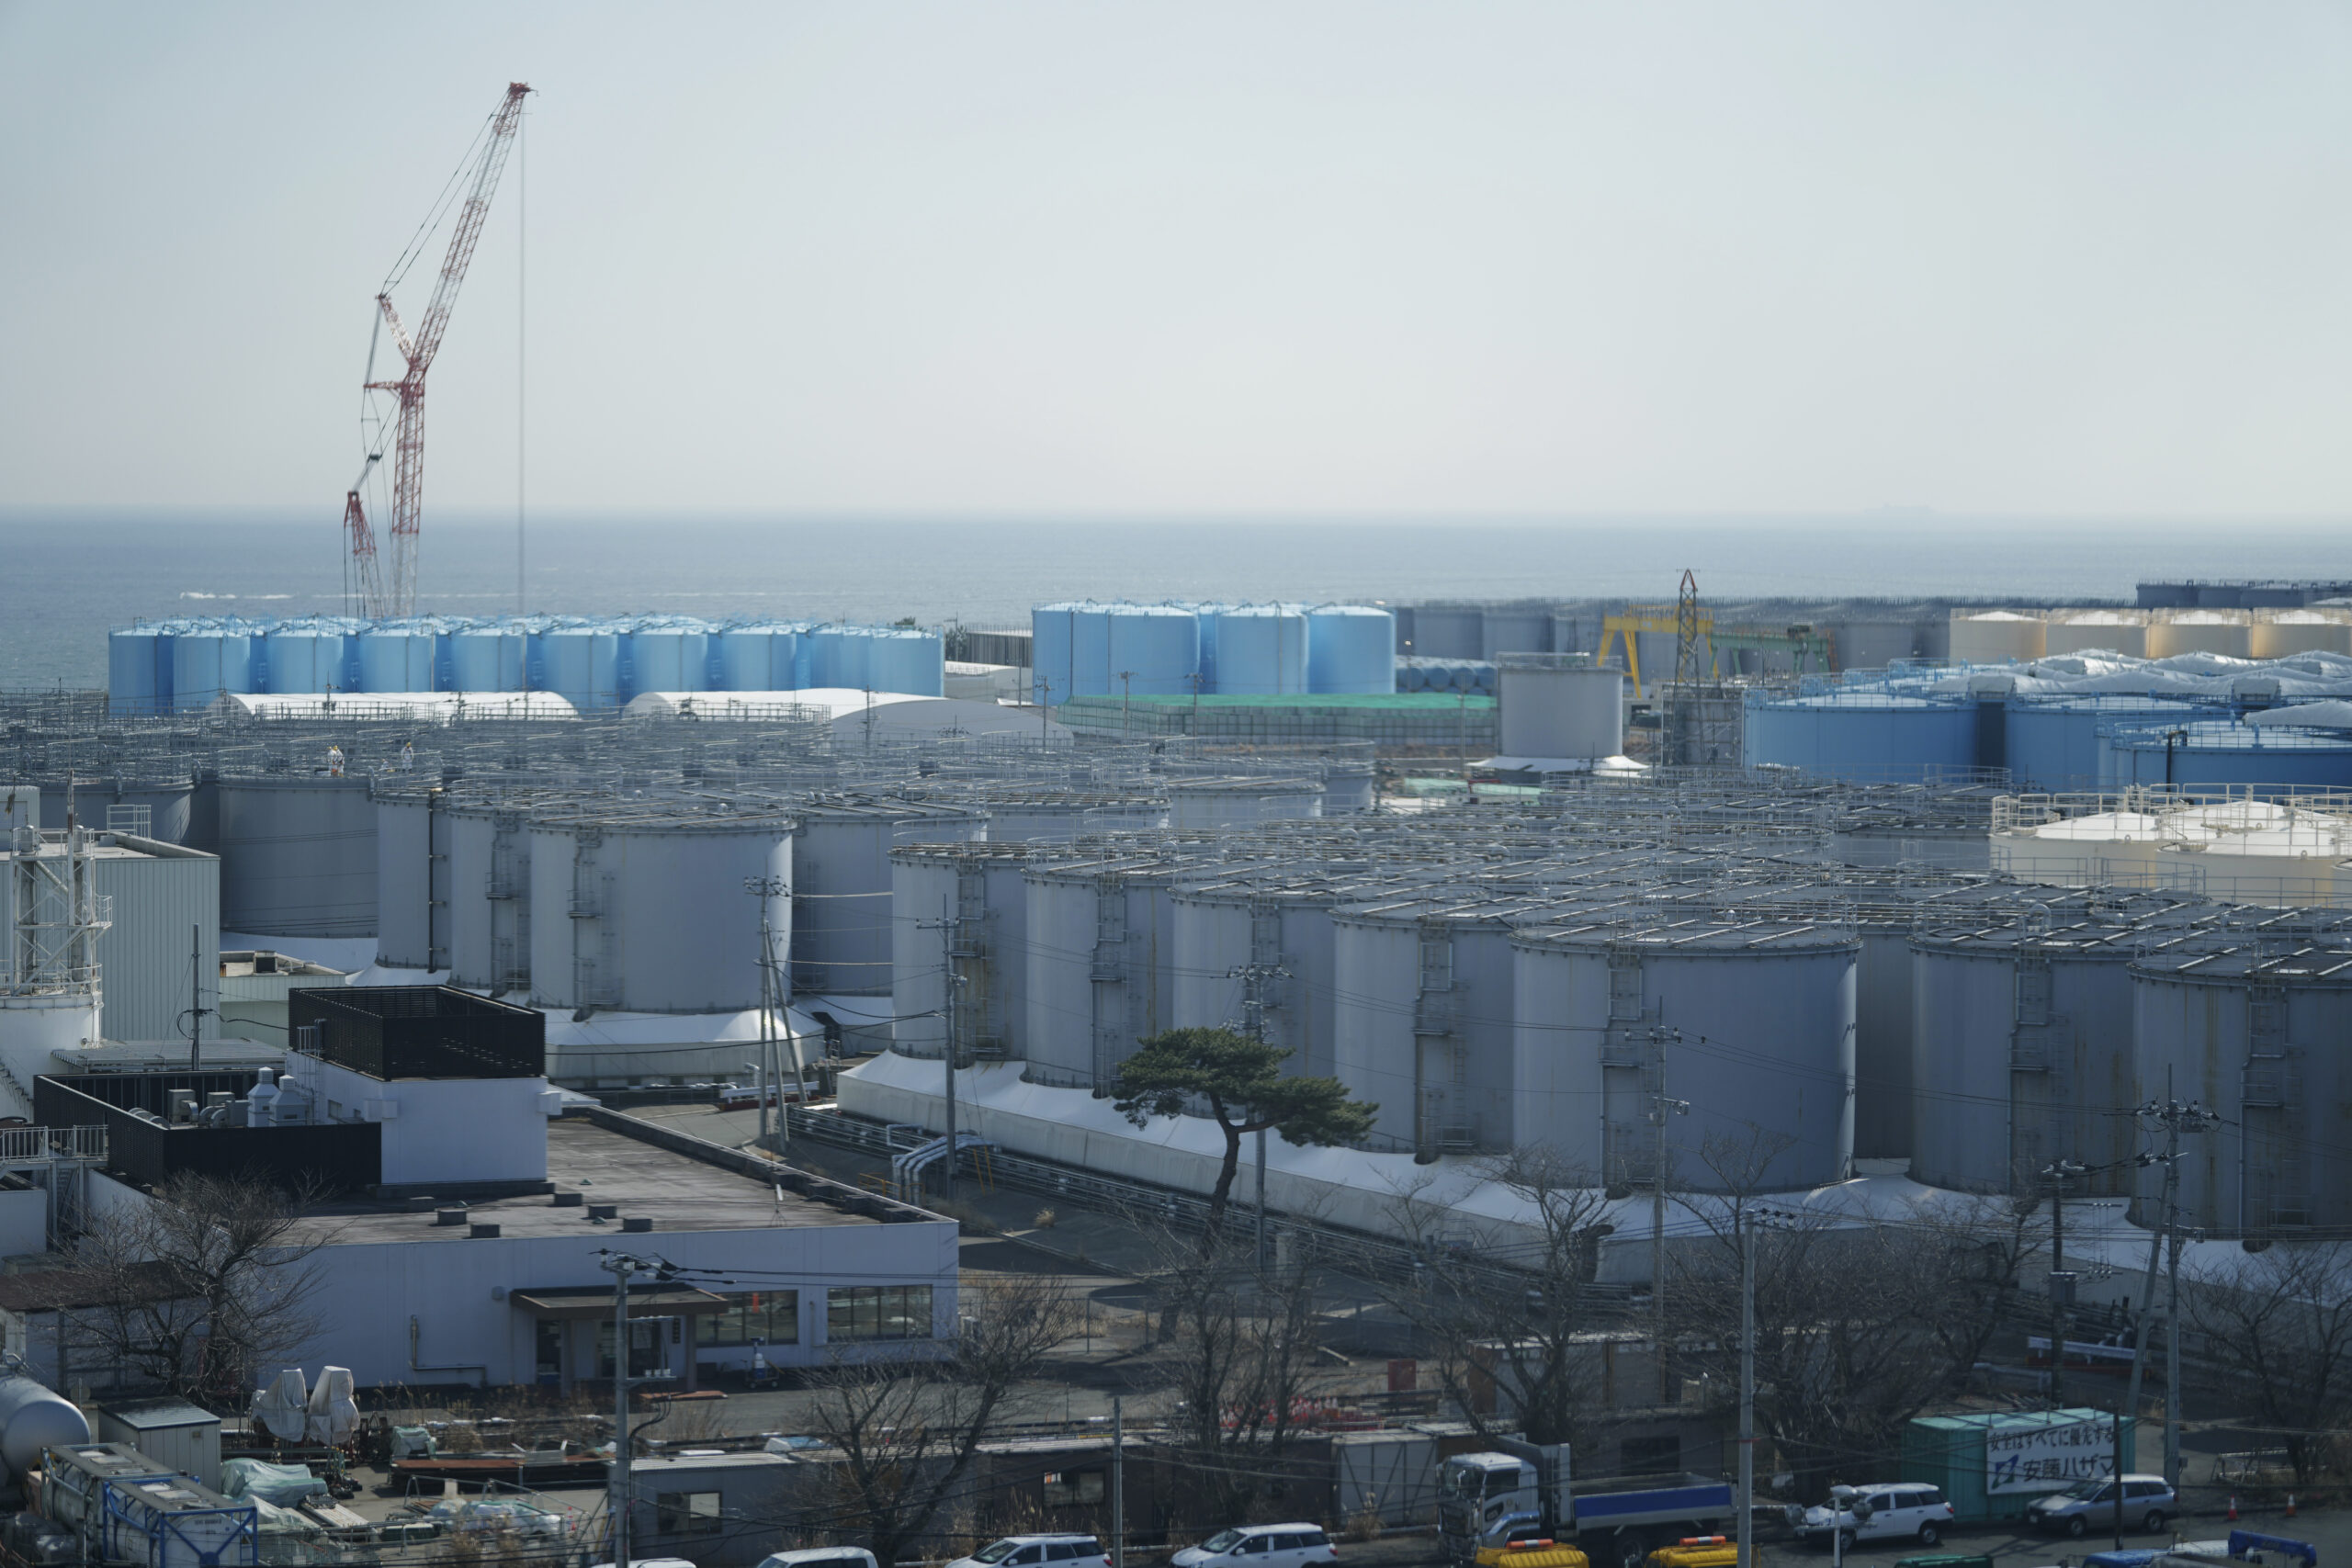 FILE - Tanks storing treated radioactive water after it was used to cool the melted fuel are seen at the Fukushima Daiichi nuclear power plant, run by Tokyo Electric Power Company Holdings (TEPCO), in Okuma town, northeastern Japan, on March 3, 2022. Japan’s nuclear regulator on Wednesday, May 18, 2022, approved plans by the operator of the wrecked Fukushima nuclear plant to release its treated radioactive wastewater into the sea next year, saying the outlined methods are safe and risks to the environment minimal. (AP Photo/Hiro Komae, File)